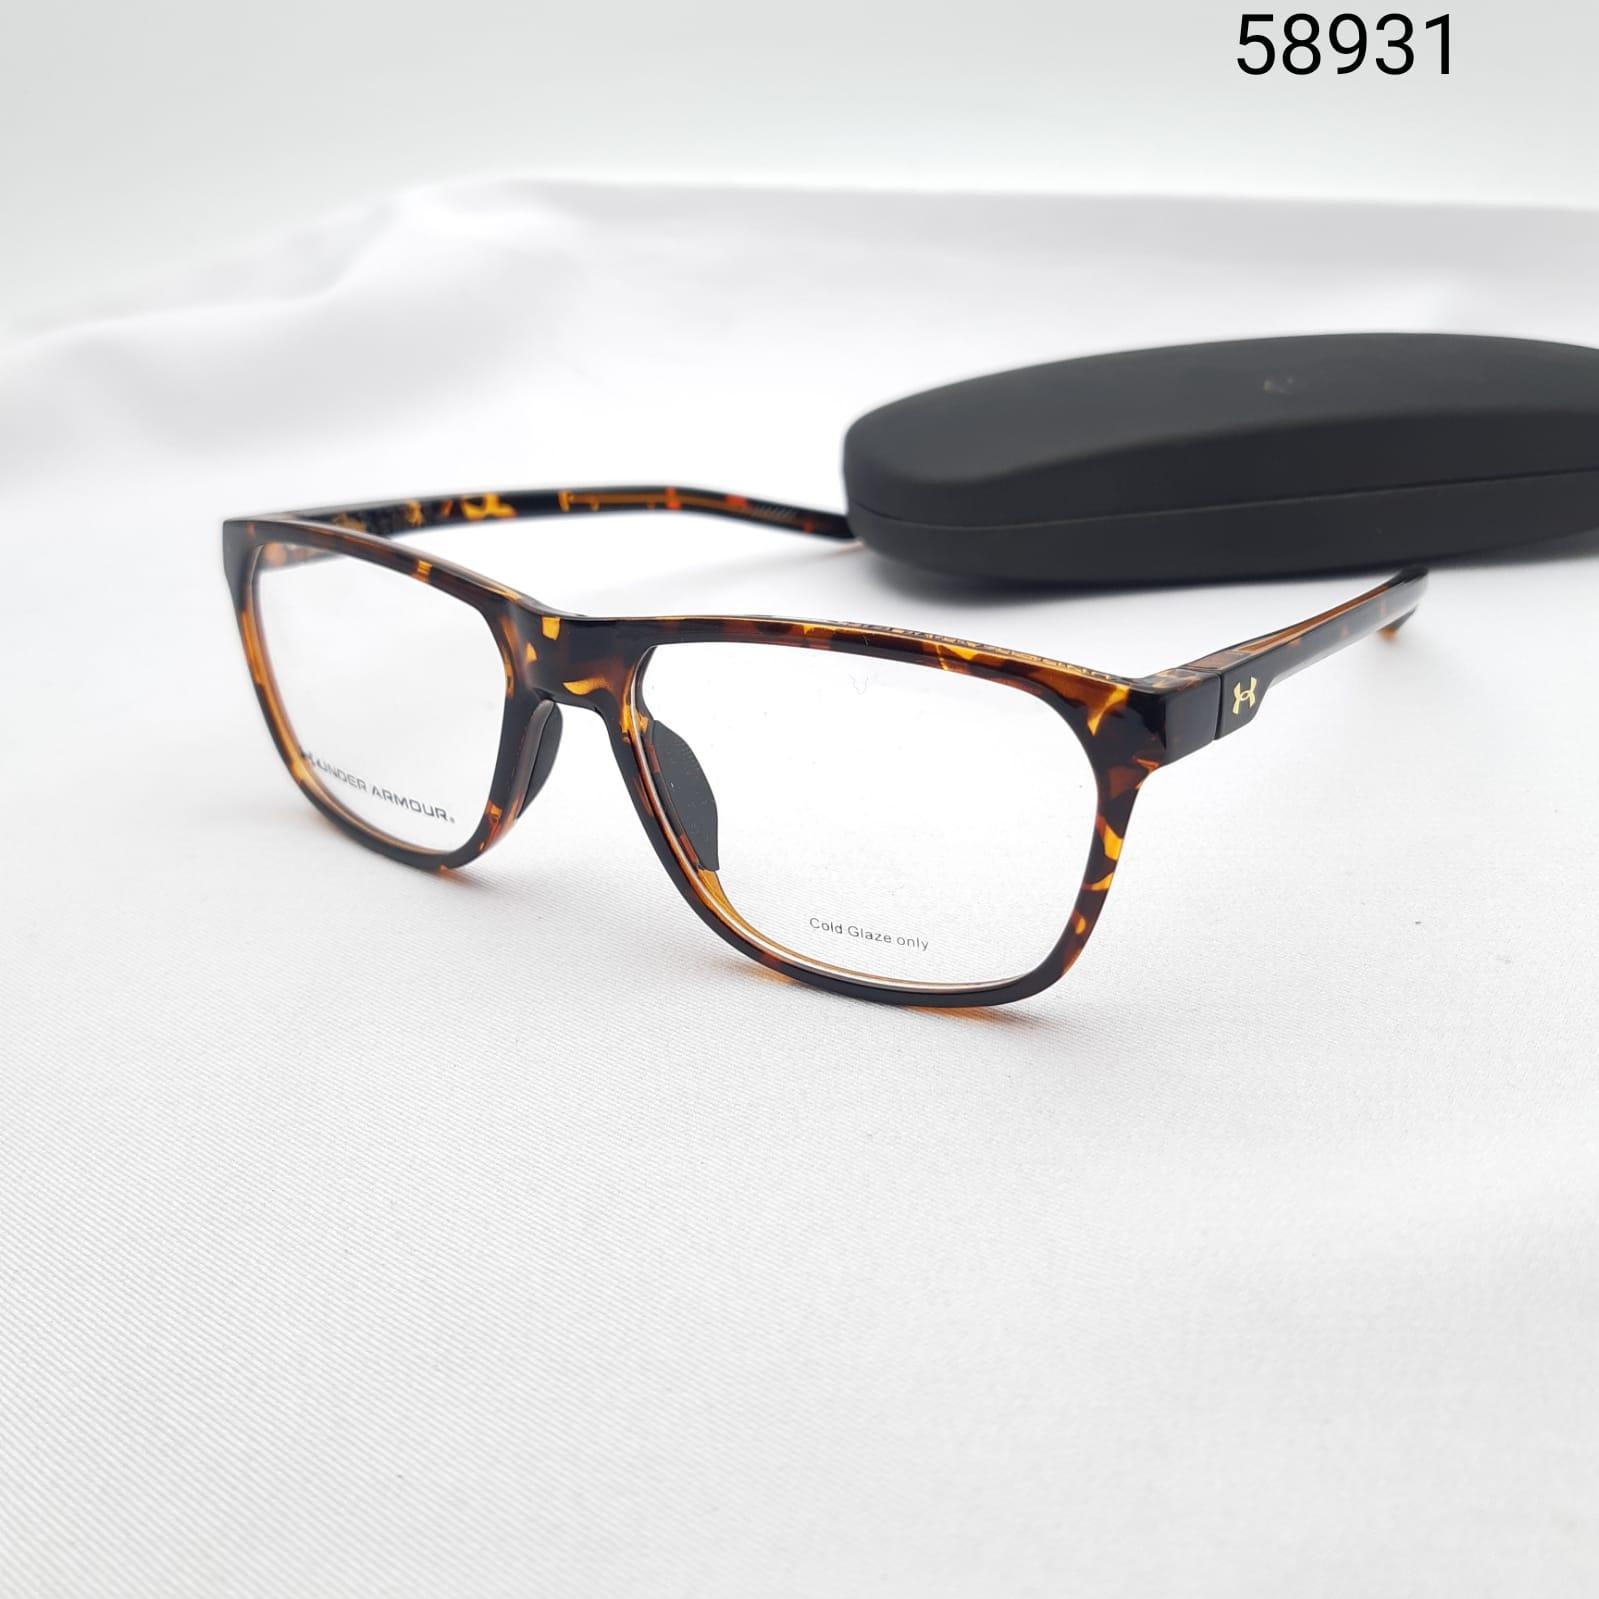 Under Armour Spectacles - Customized Prescription Sunglasses and Spectacles